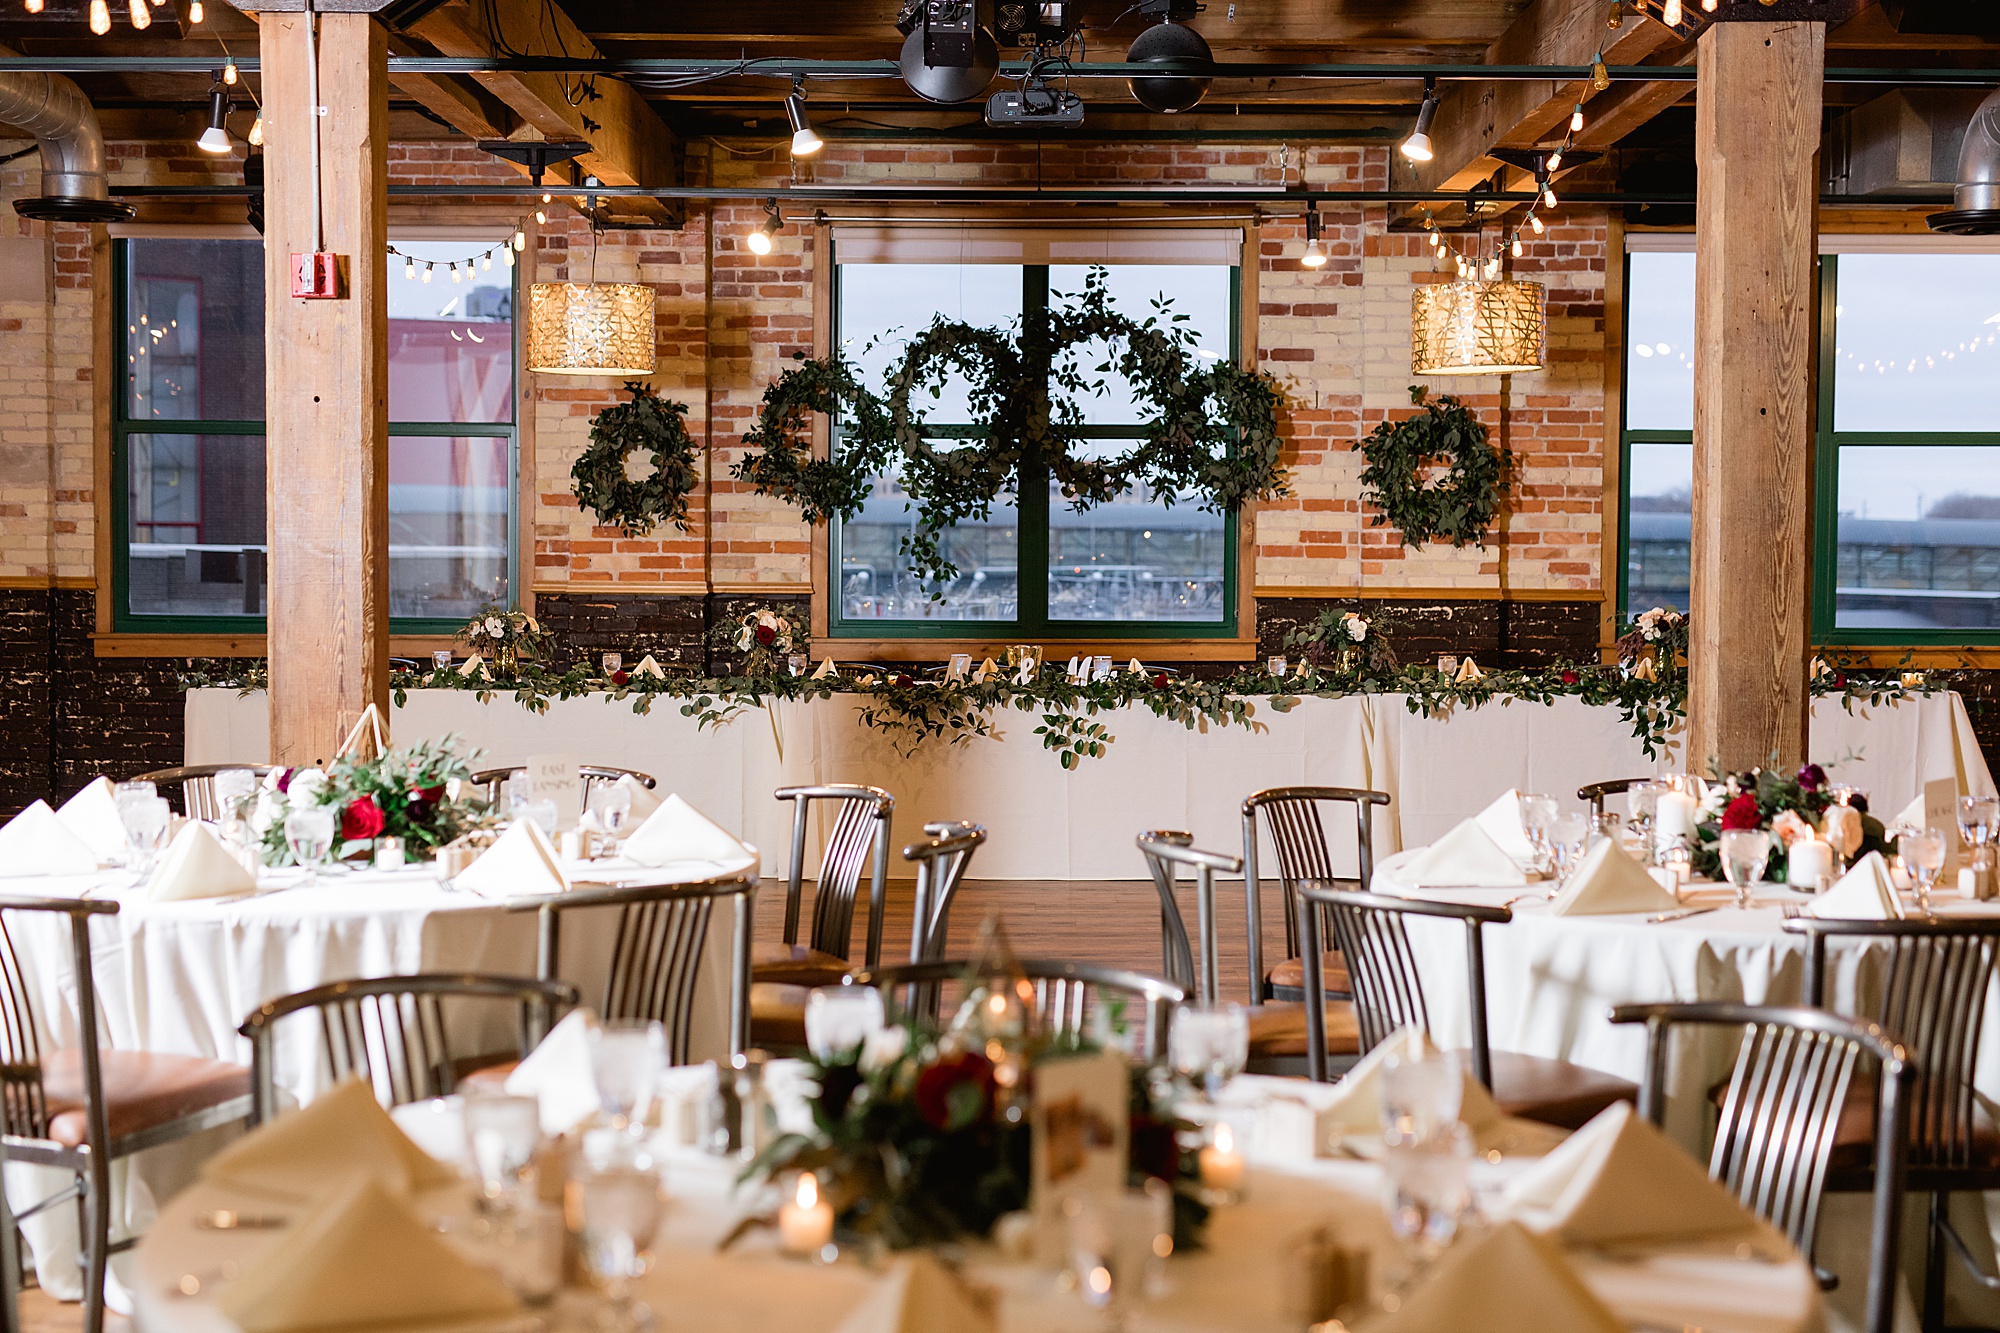 A romantic wintertime Downtown Grand Rapids wedding filled with cream and burgundy flowers by Breanne Rochelle Photography.